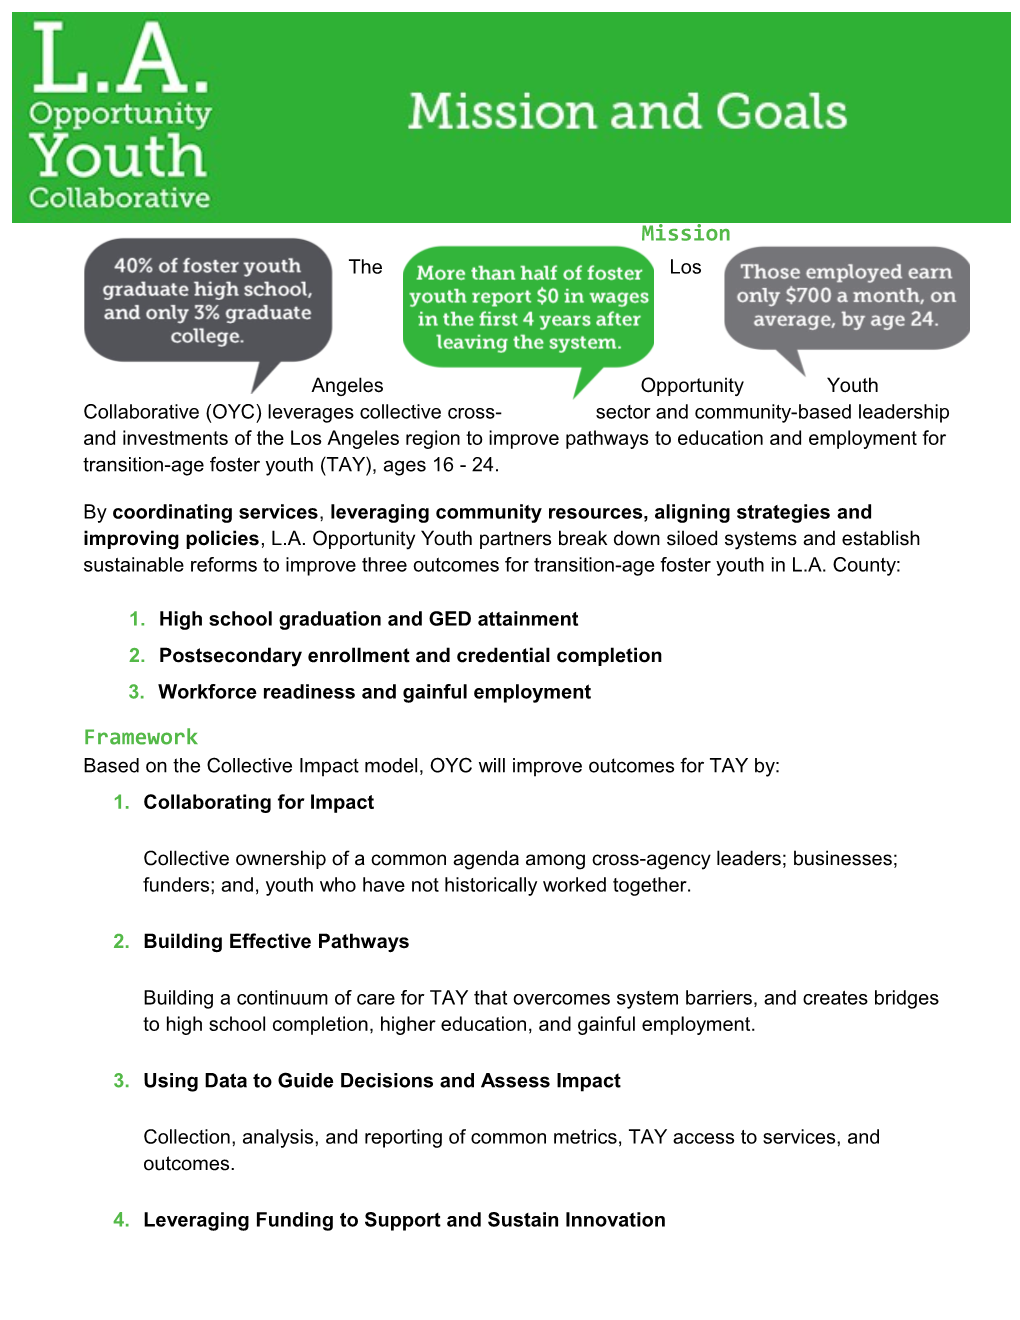 The Los Angeles Opportunity Youth Collaborative (OYC) Leveragescollective Cross-Sector